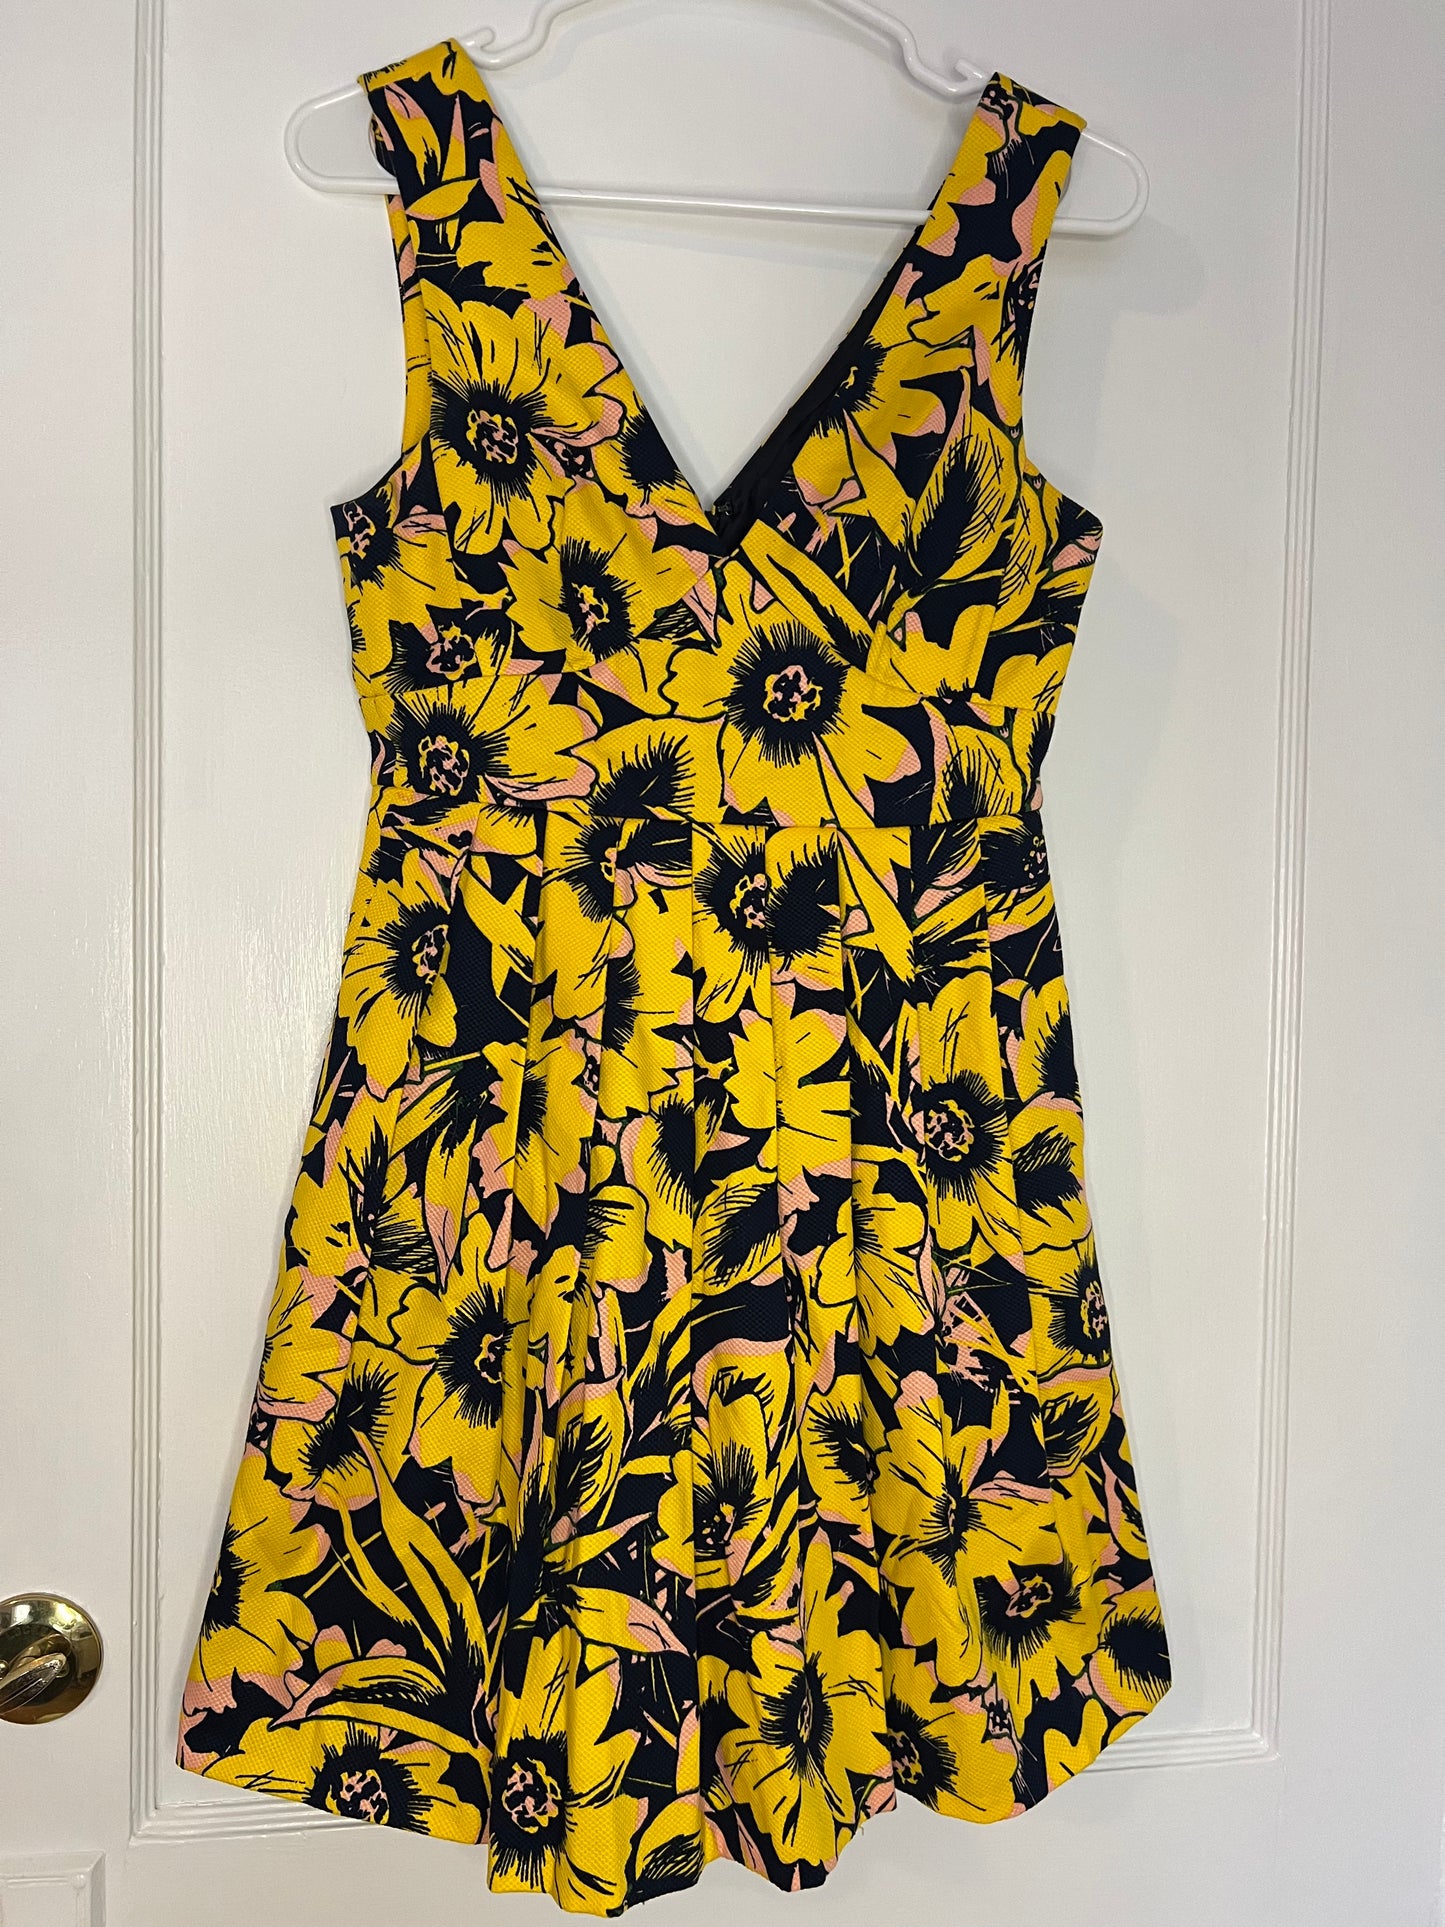 JCrew Yellow Sunflower Pattern Sleeveless Dress Size 2P New Without Tags PPU 45208 or Spring Sale